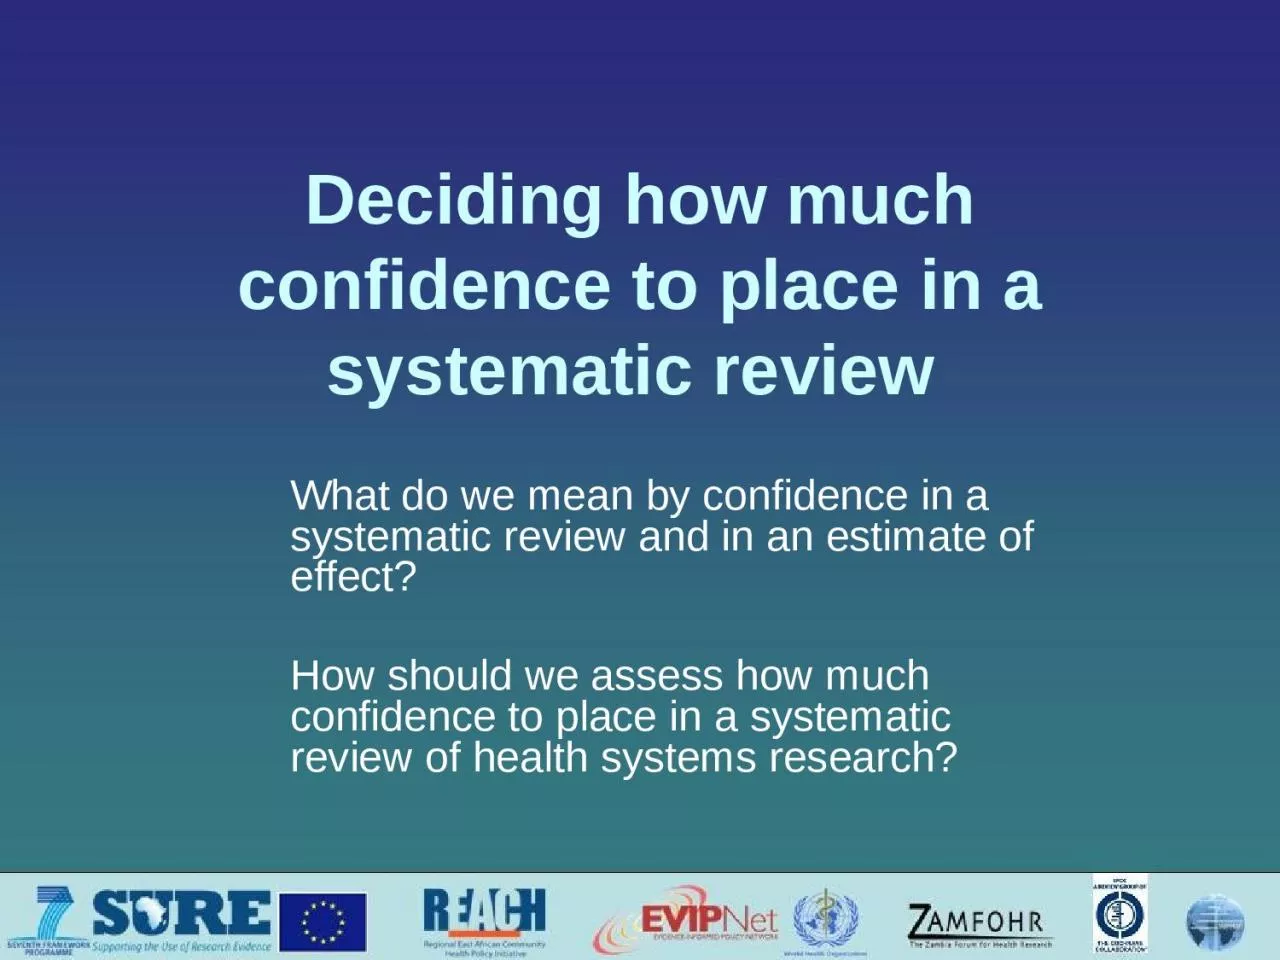 Deciding how much confidence to place in a systematic review